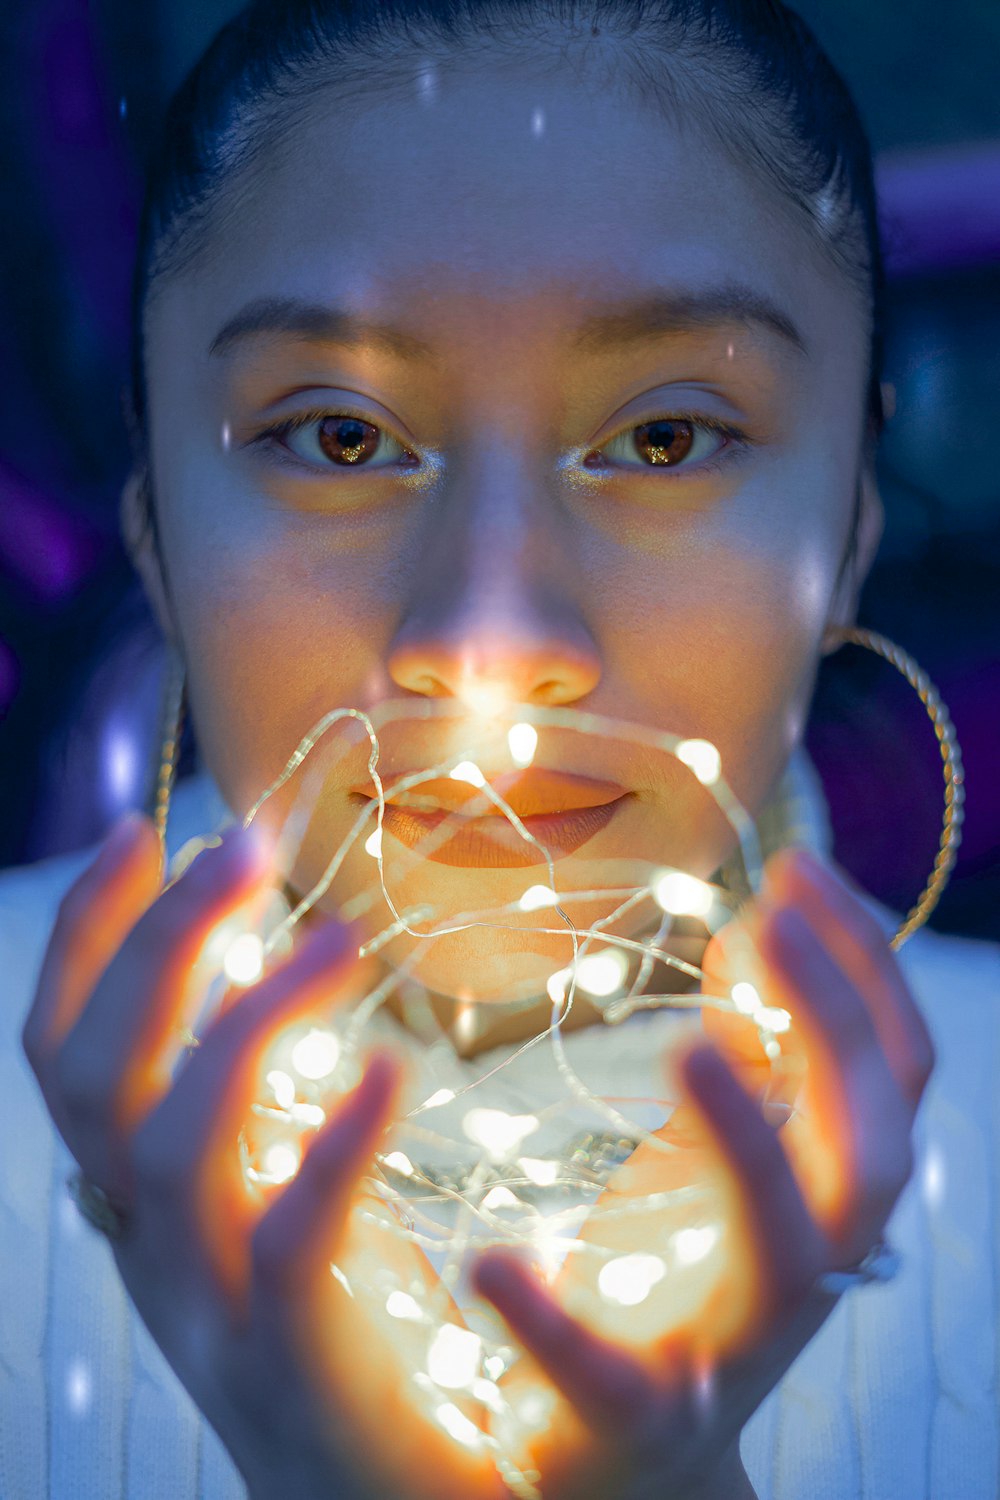 woman wearing white top and gold-colored hoop earrings holding lighted white string lights